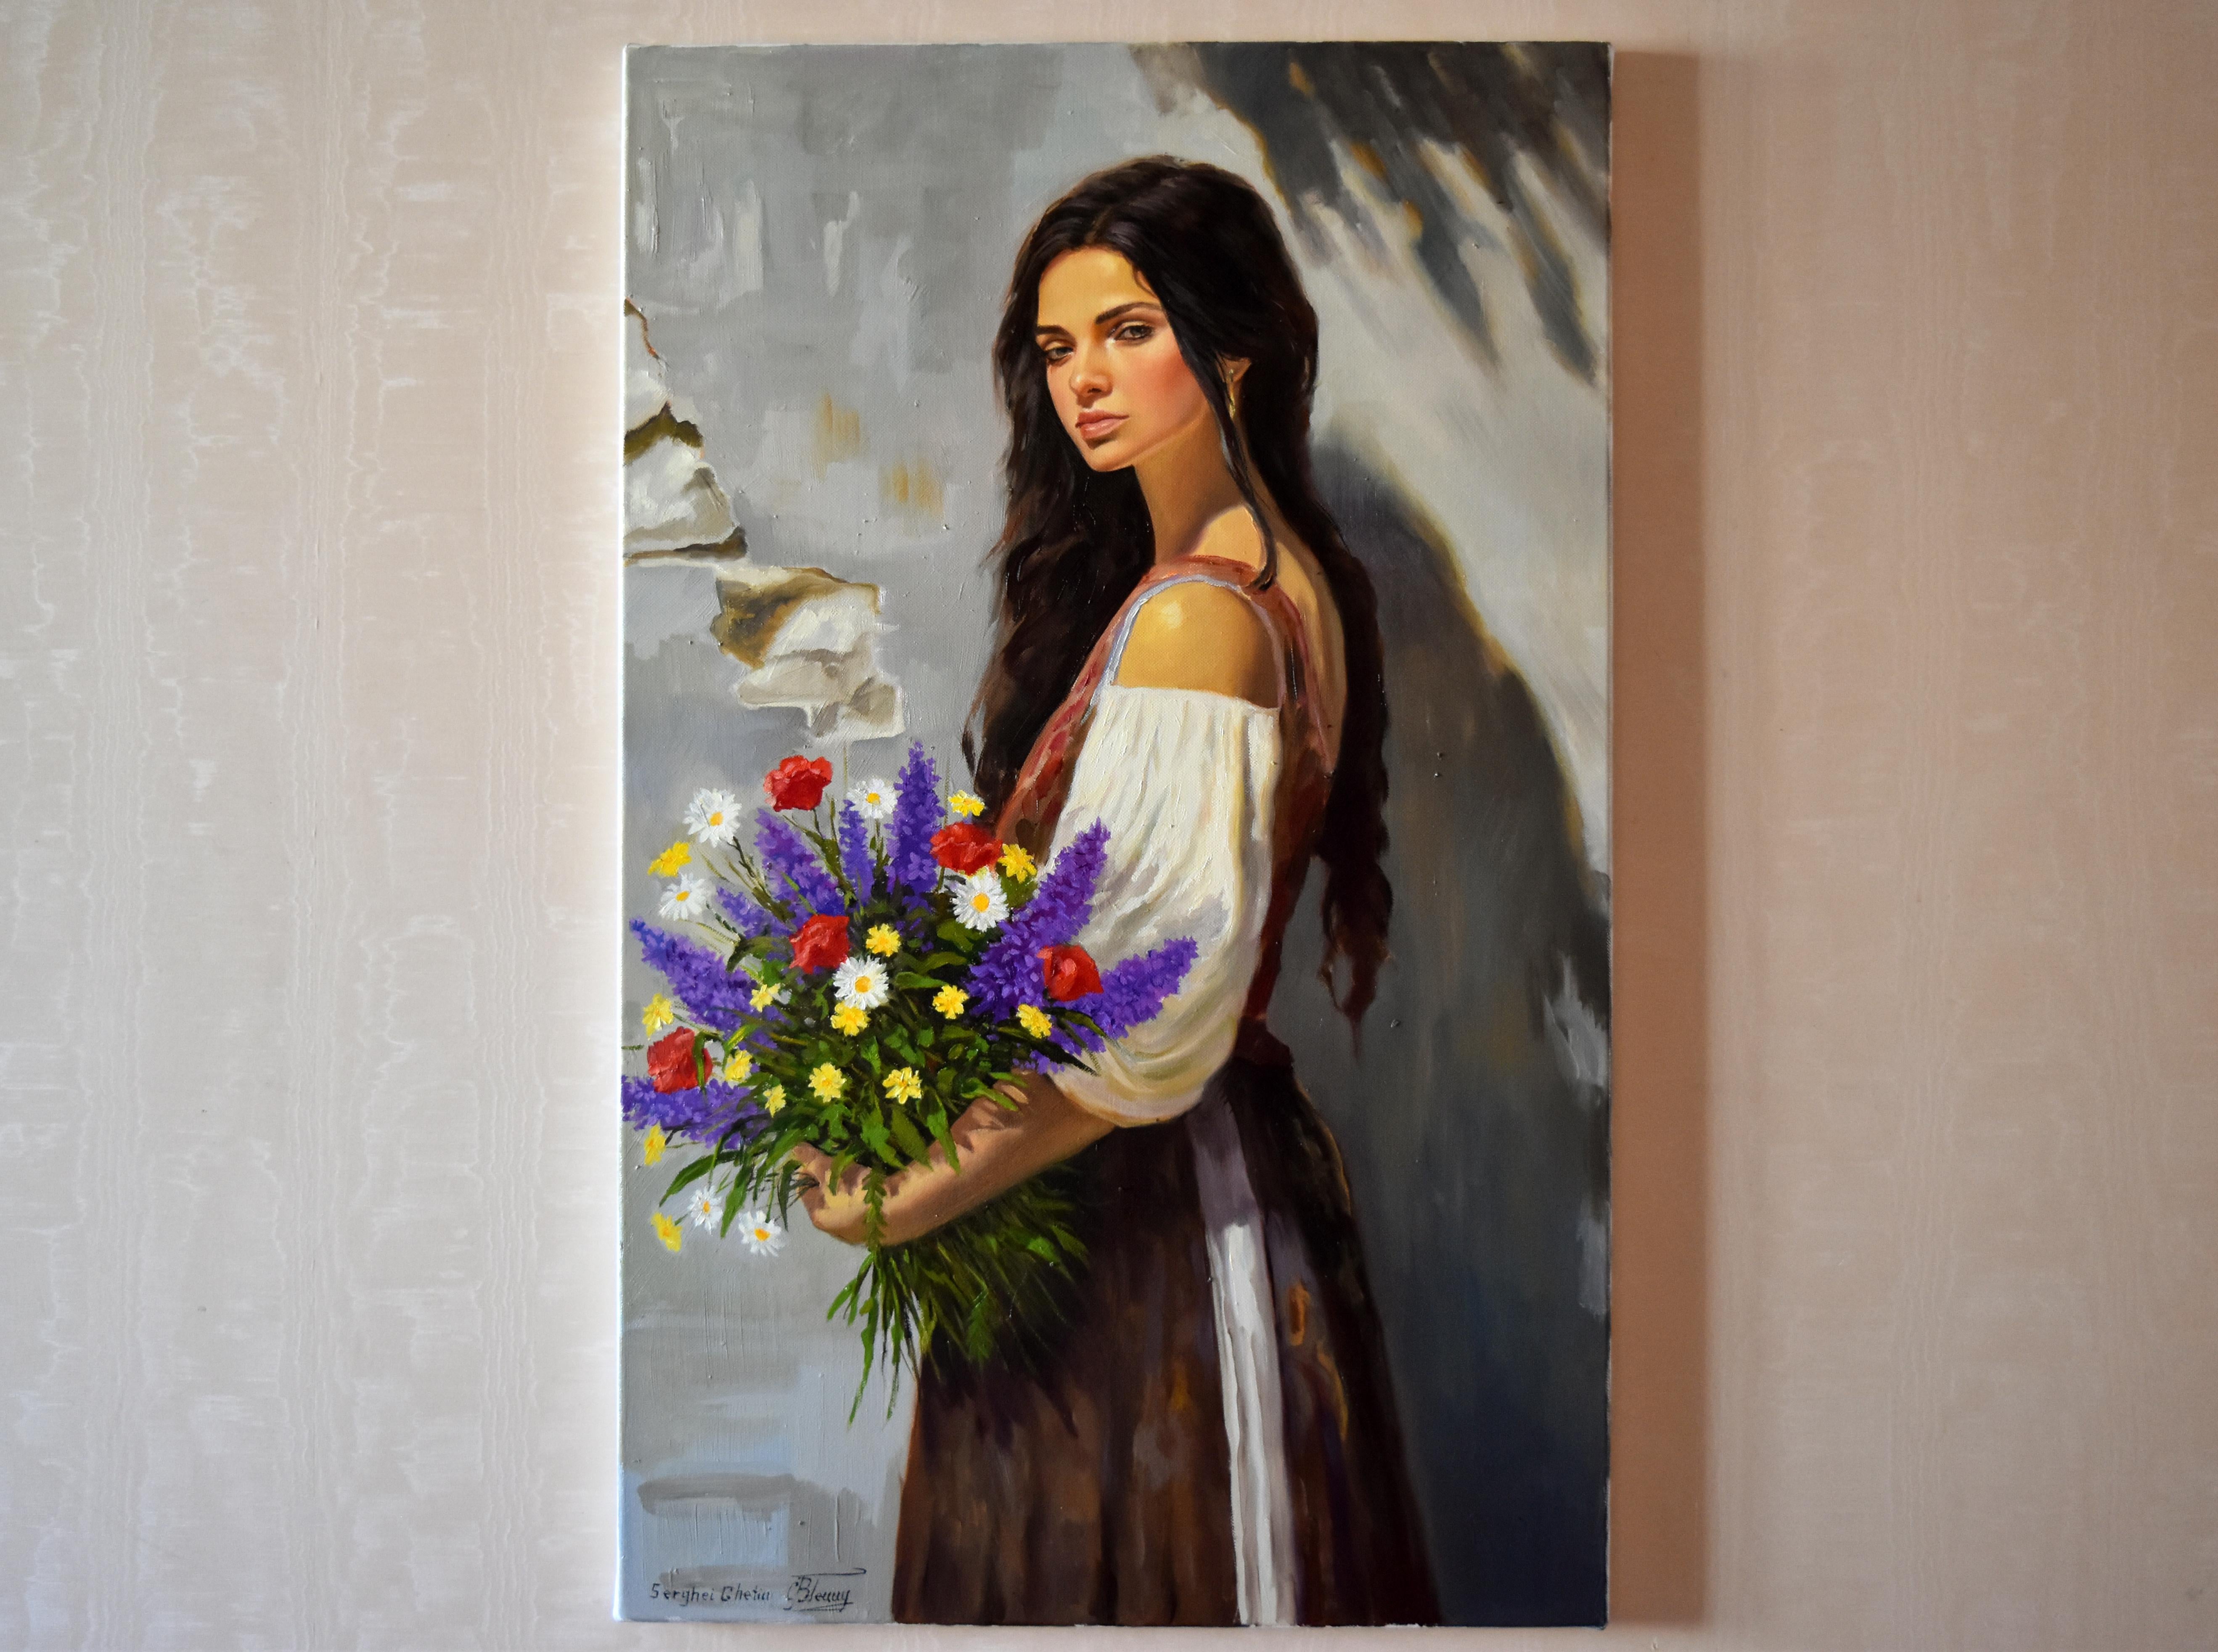 A portrait with wild flowers - Painting by Serghei Ghetiu